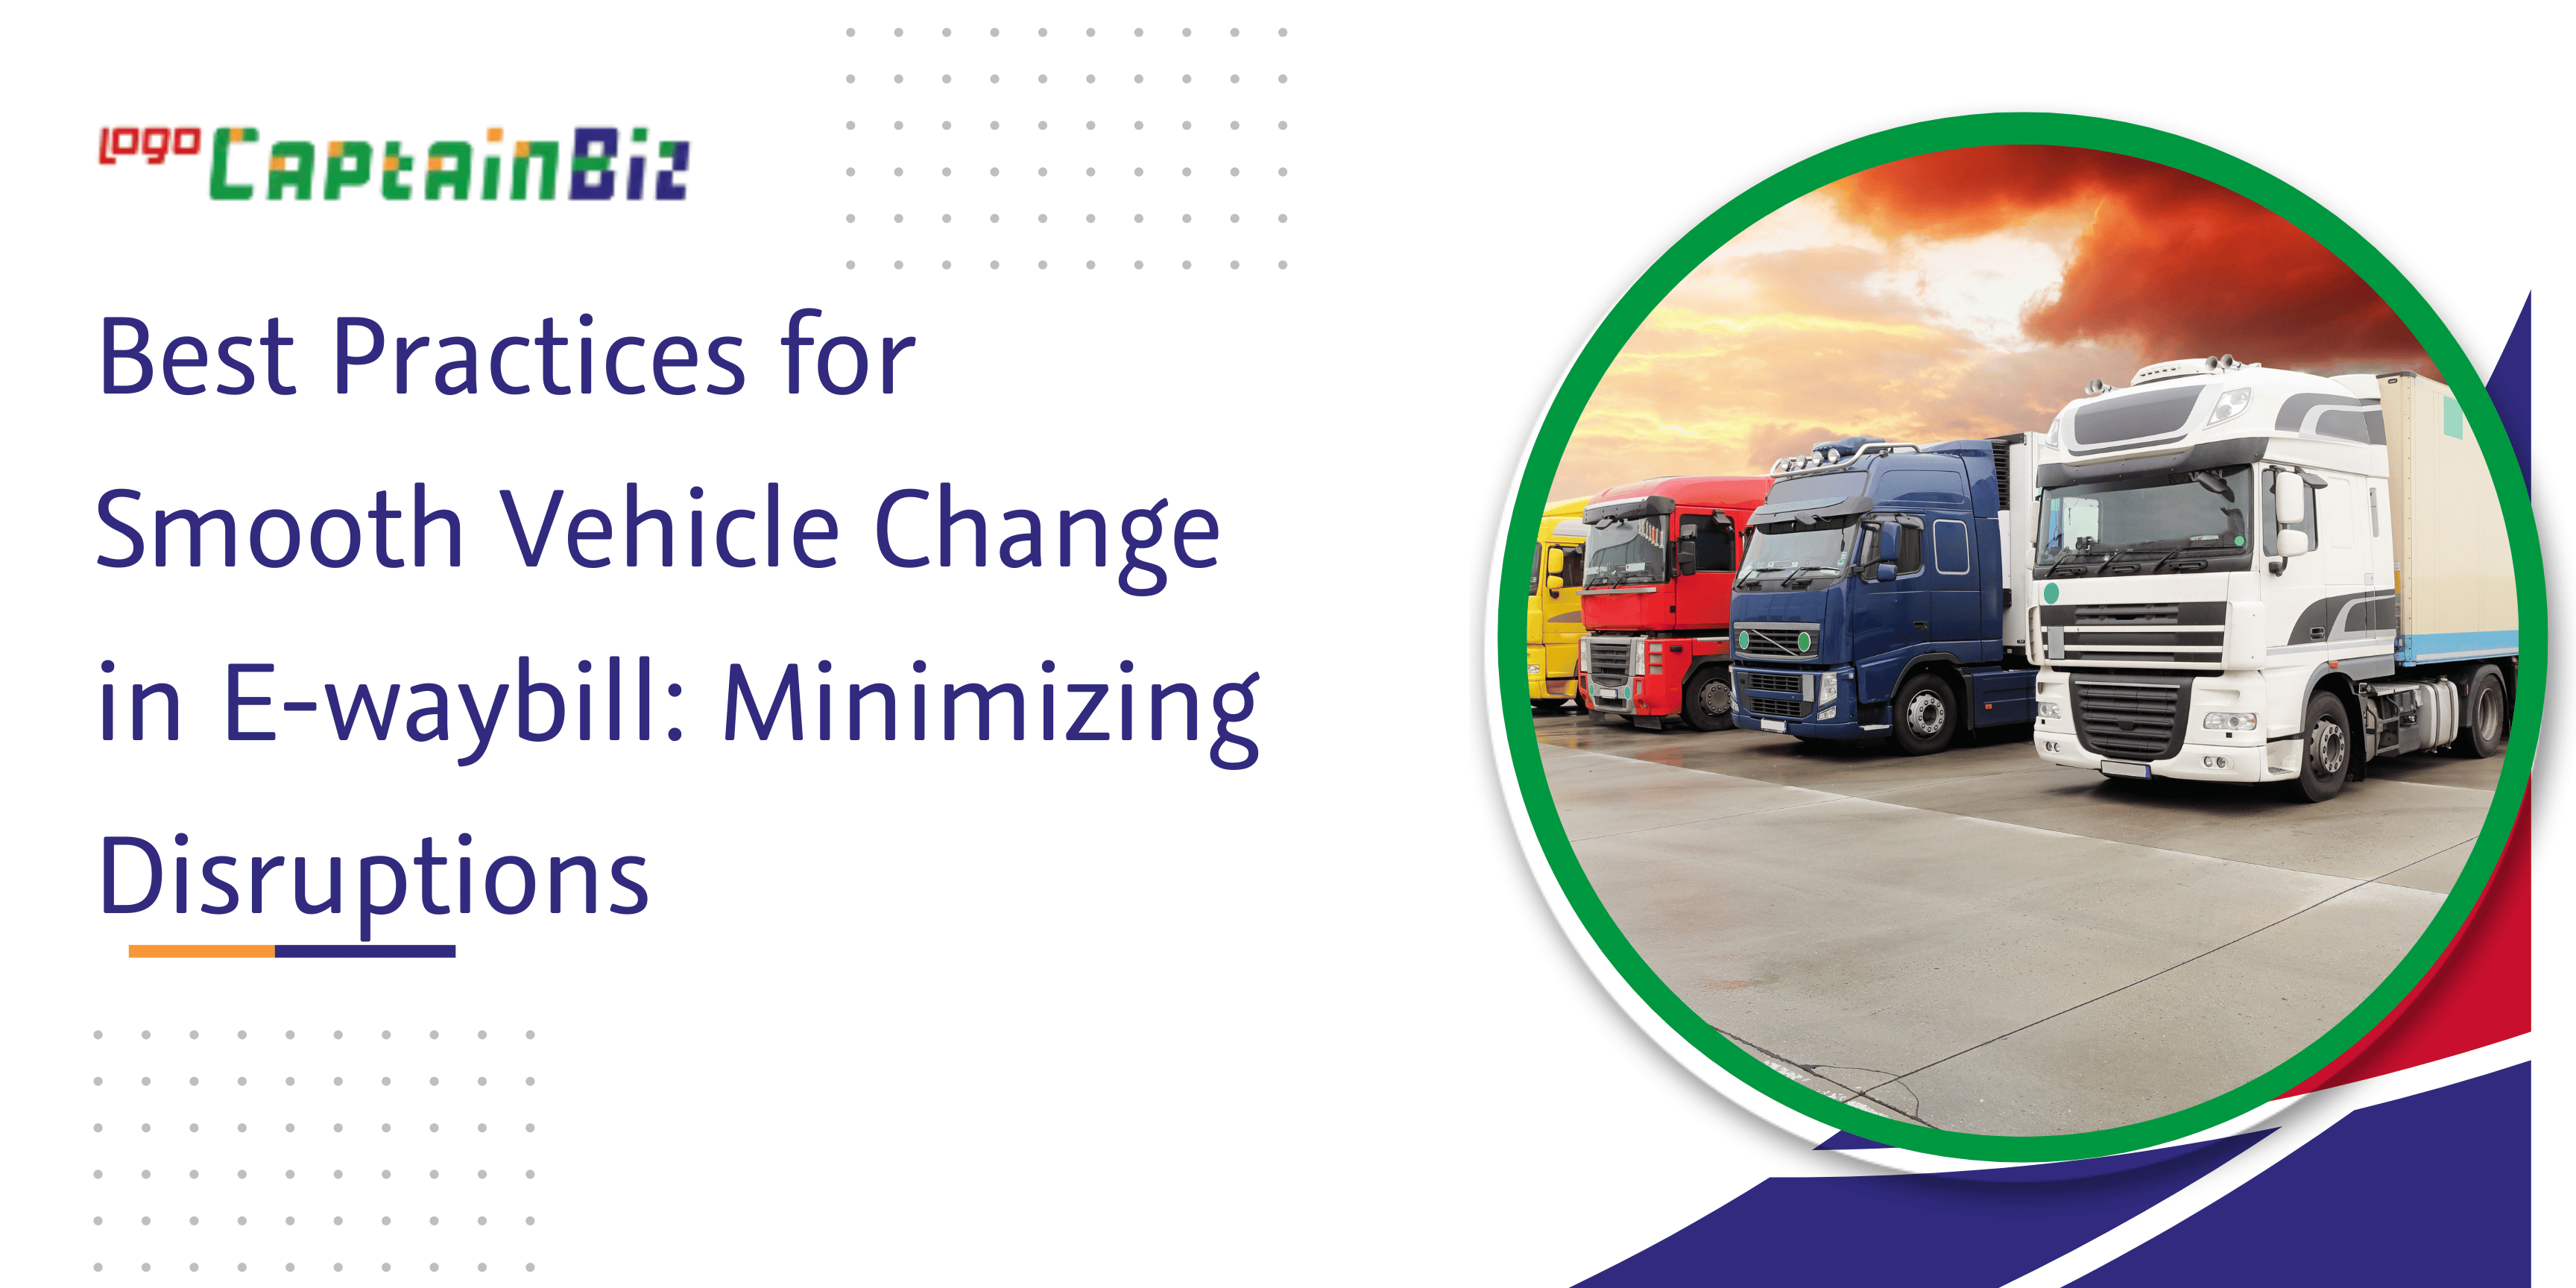 CaptainBiz: best practices for smooth vehicle change in e-waybill: minimizing disruptions